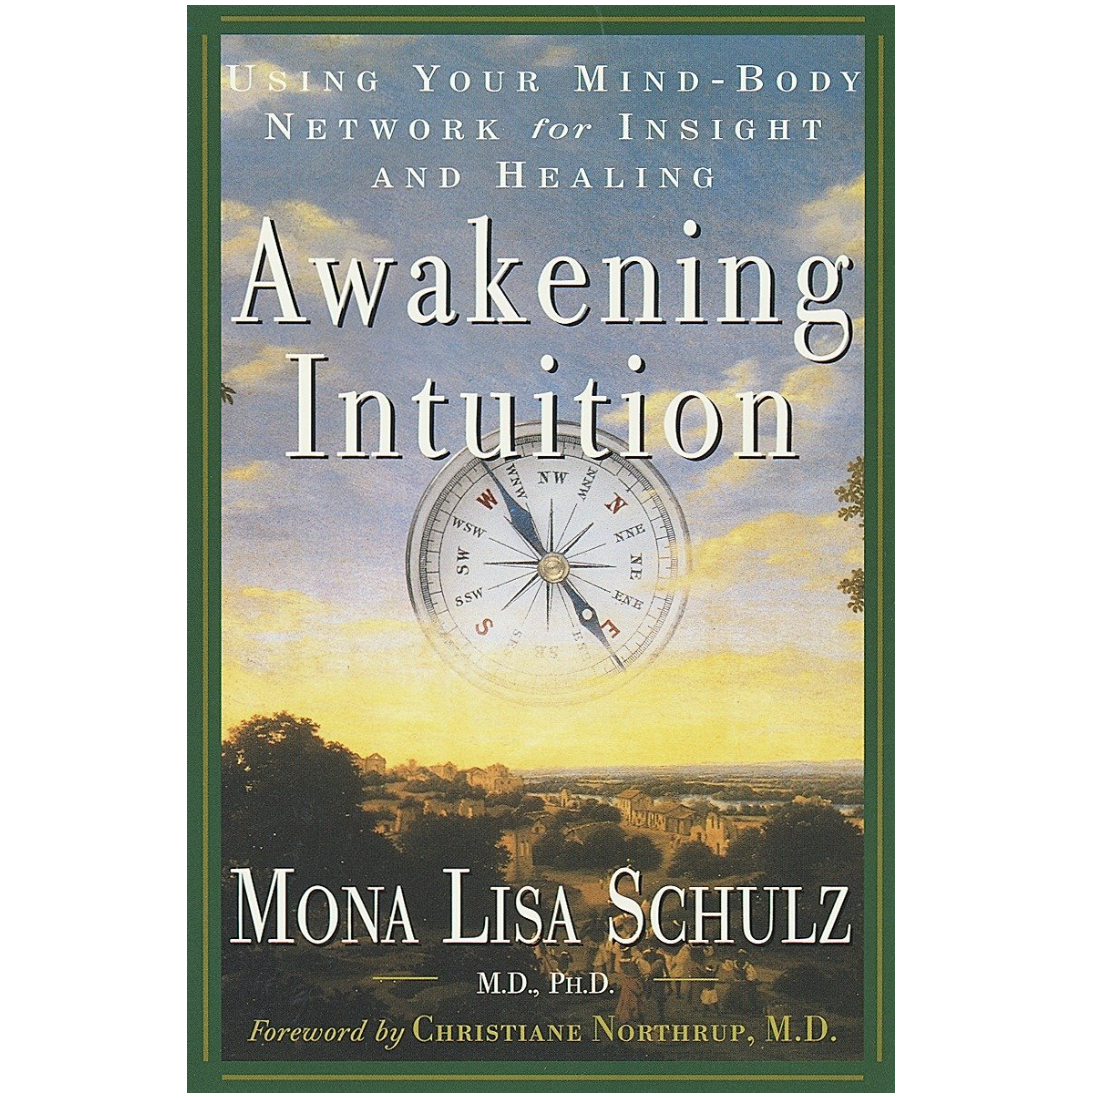 Awakening Intuition by Mona Lisa Schulz, M.D.